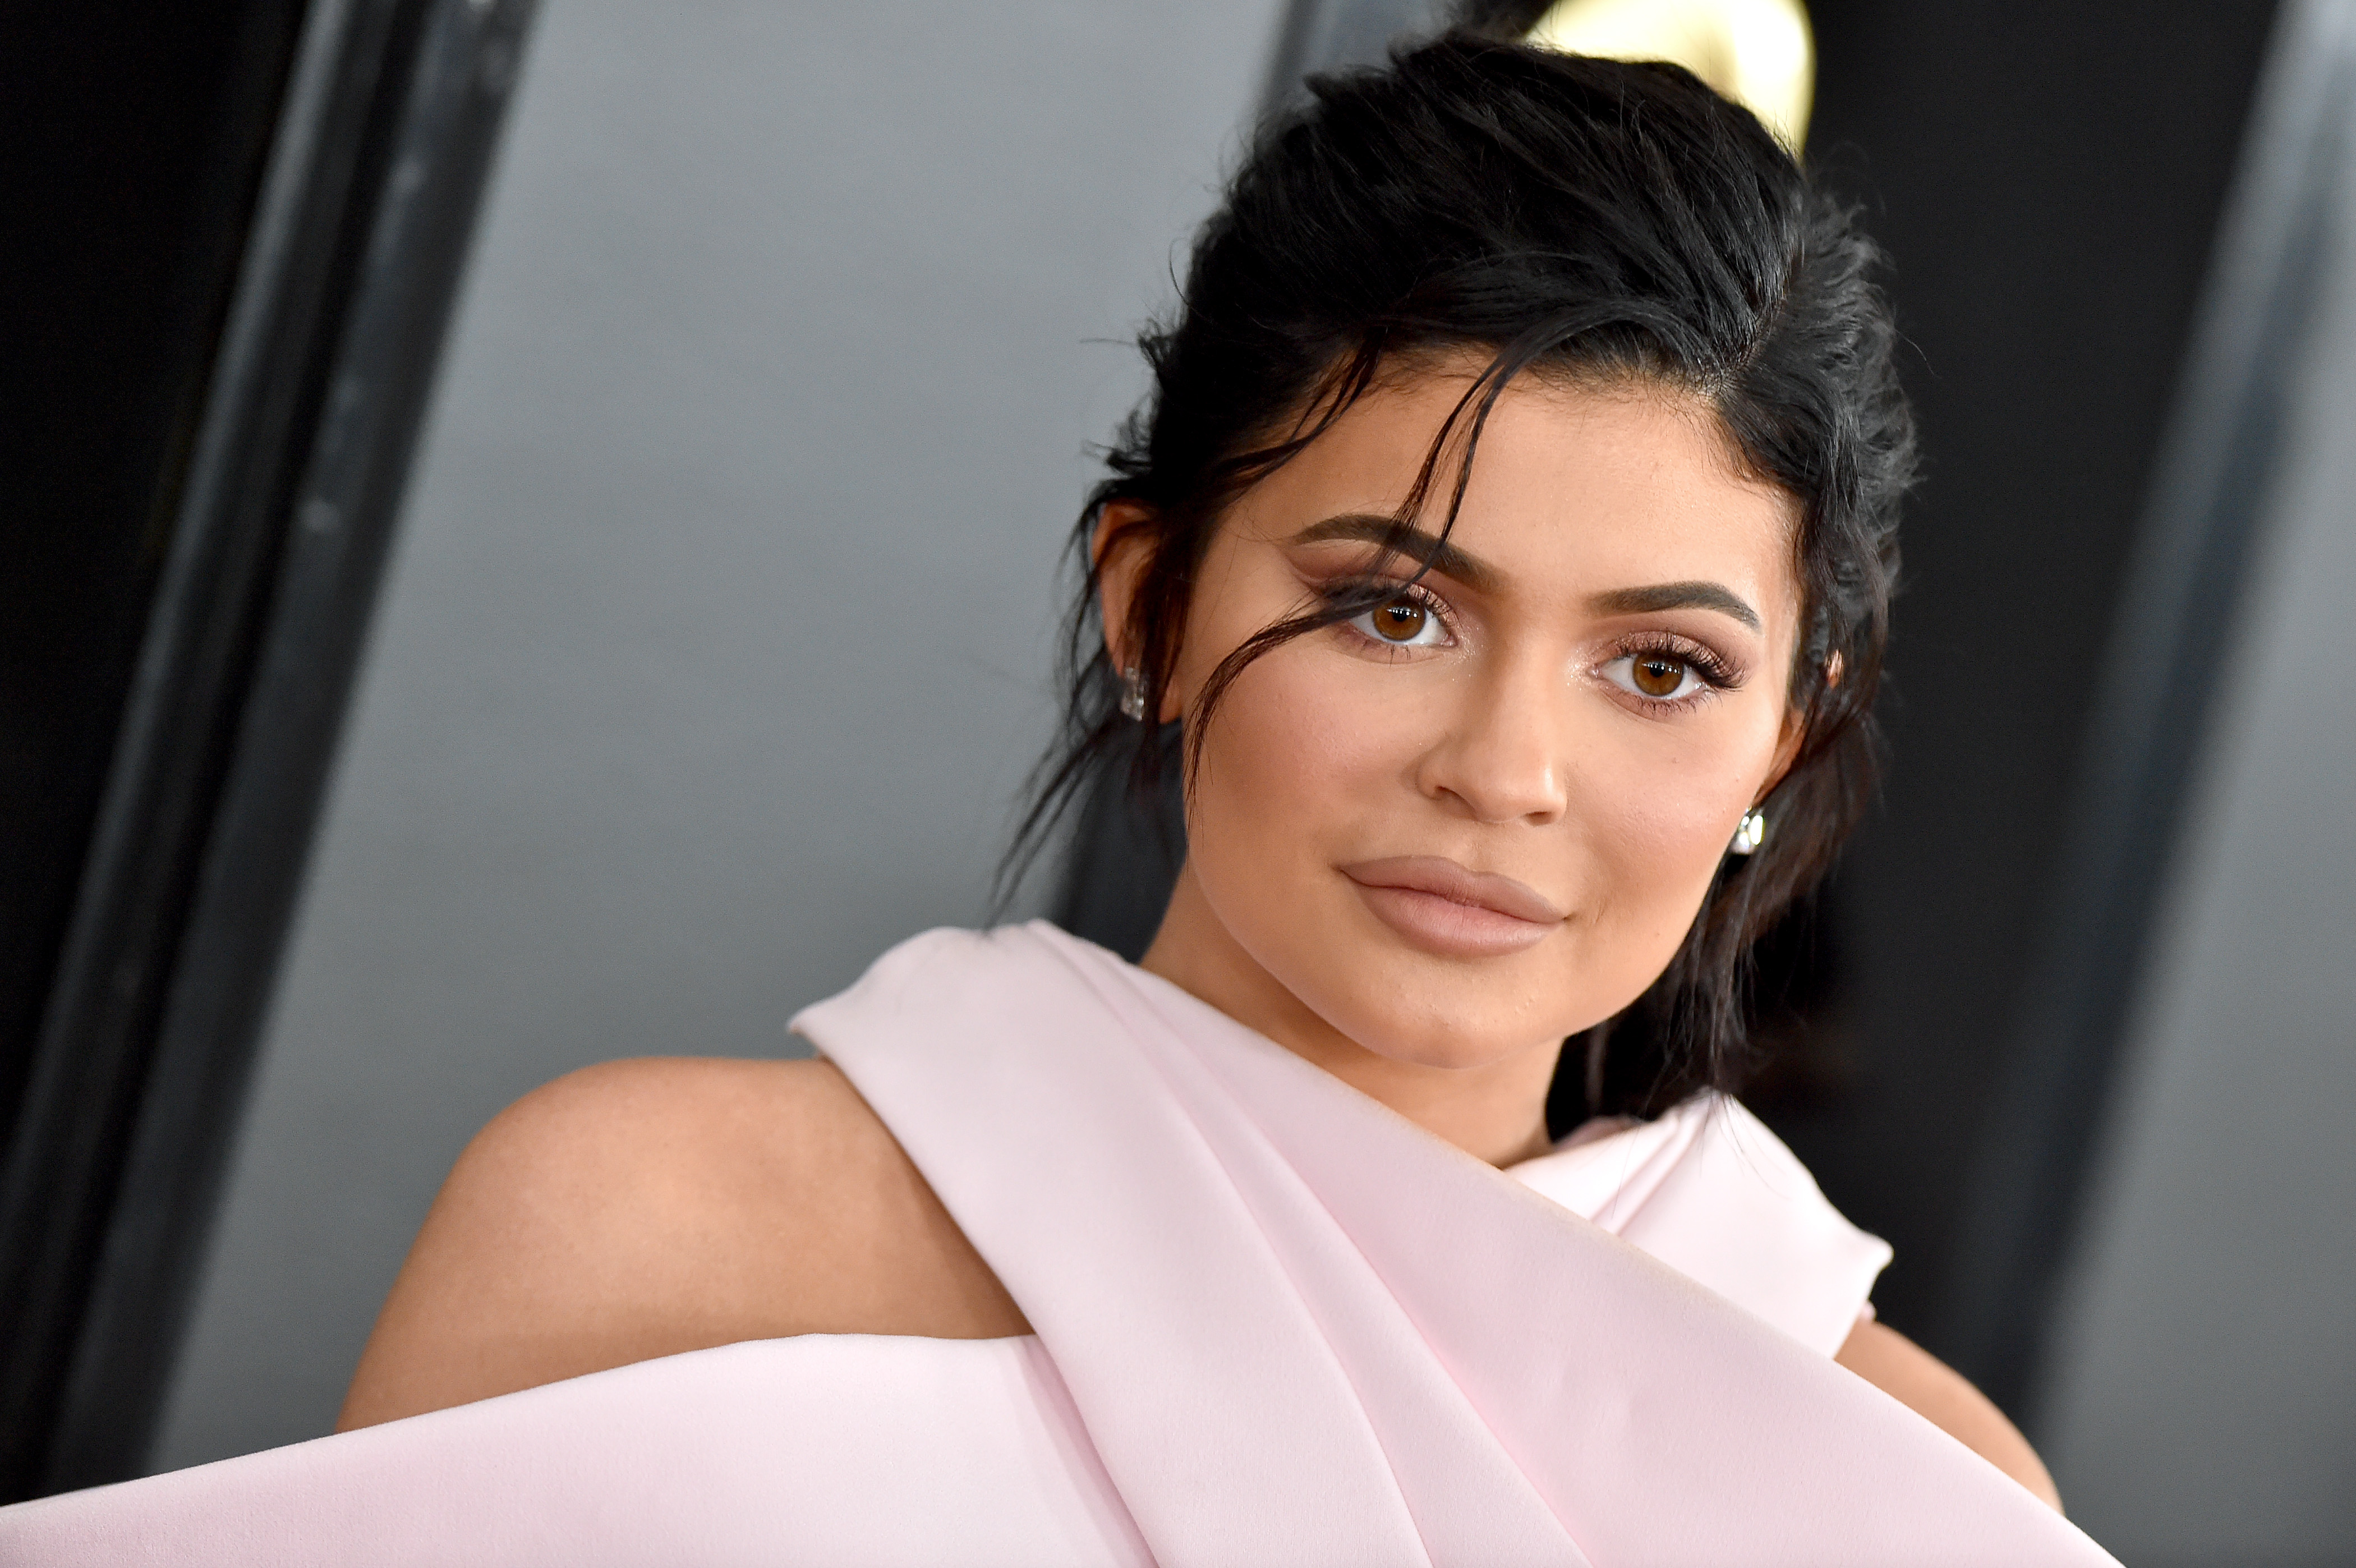 Katie Forbes Sex Video - Kylie Jenner named youngest self-made billionaire by Forbes - National |  Globalnews.ca